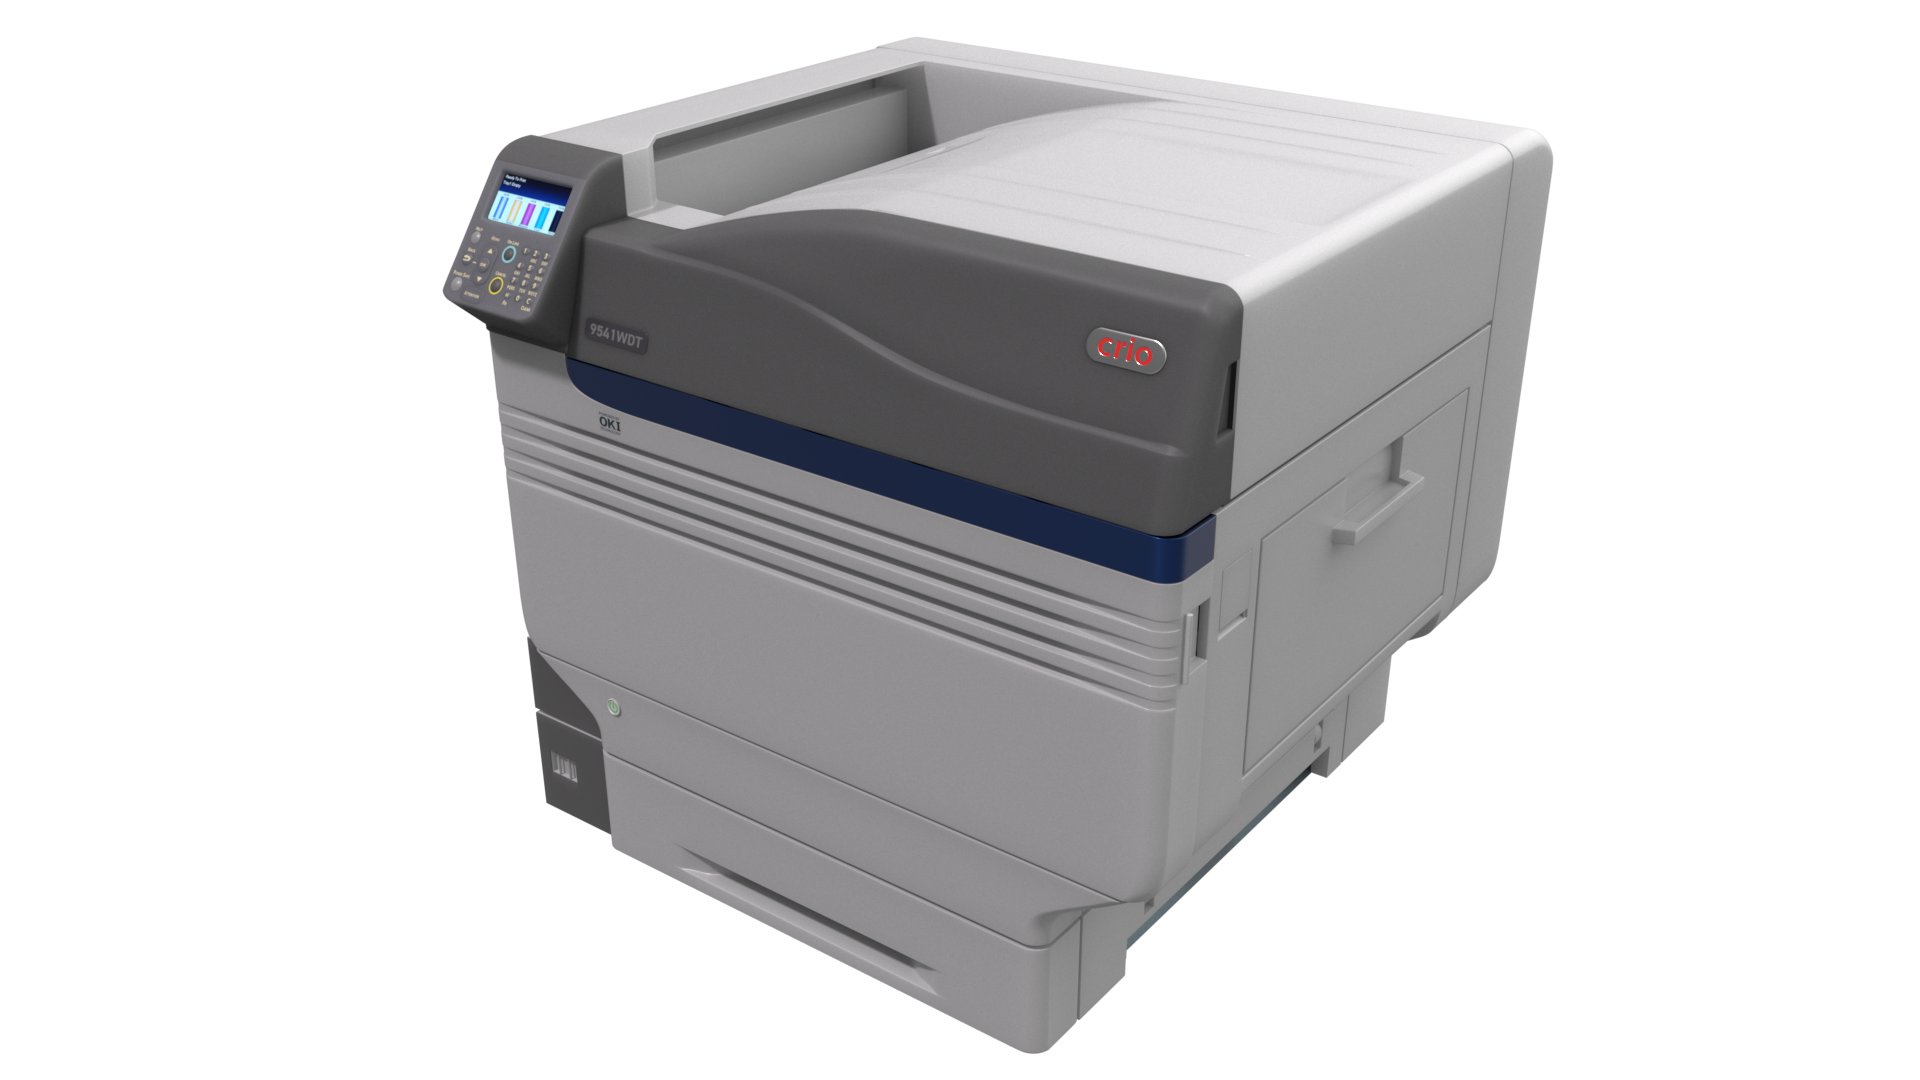 Crio 9541WDT, 13x19 white toner printer. Only CMYWK - full color, white and black toner with single pass printer.  1200x1200 dpi.  Print speed up to 18 ppm on letter-size transfer media